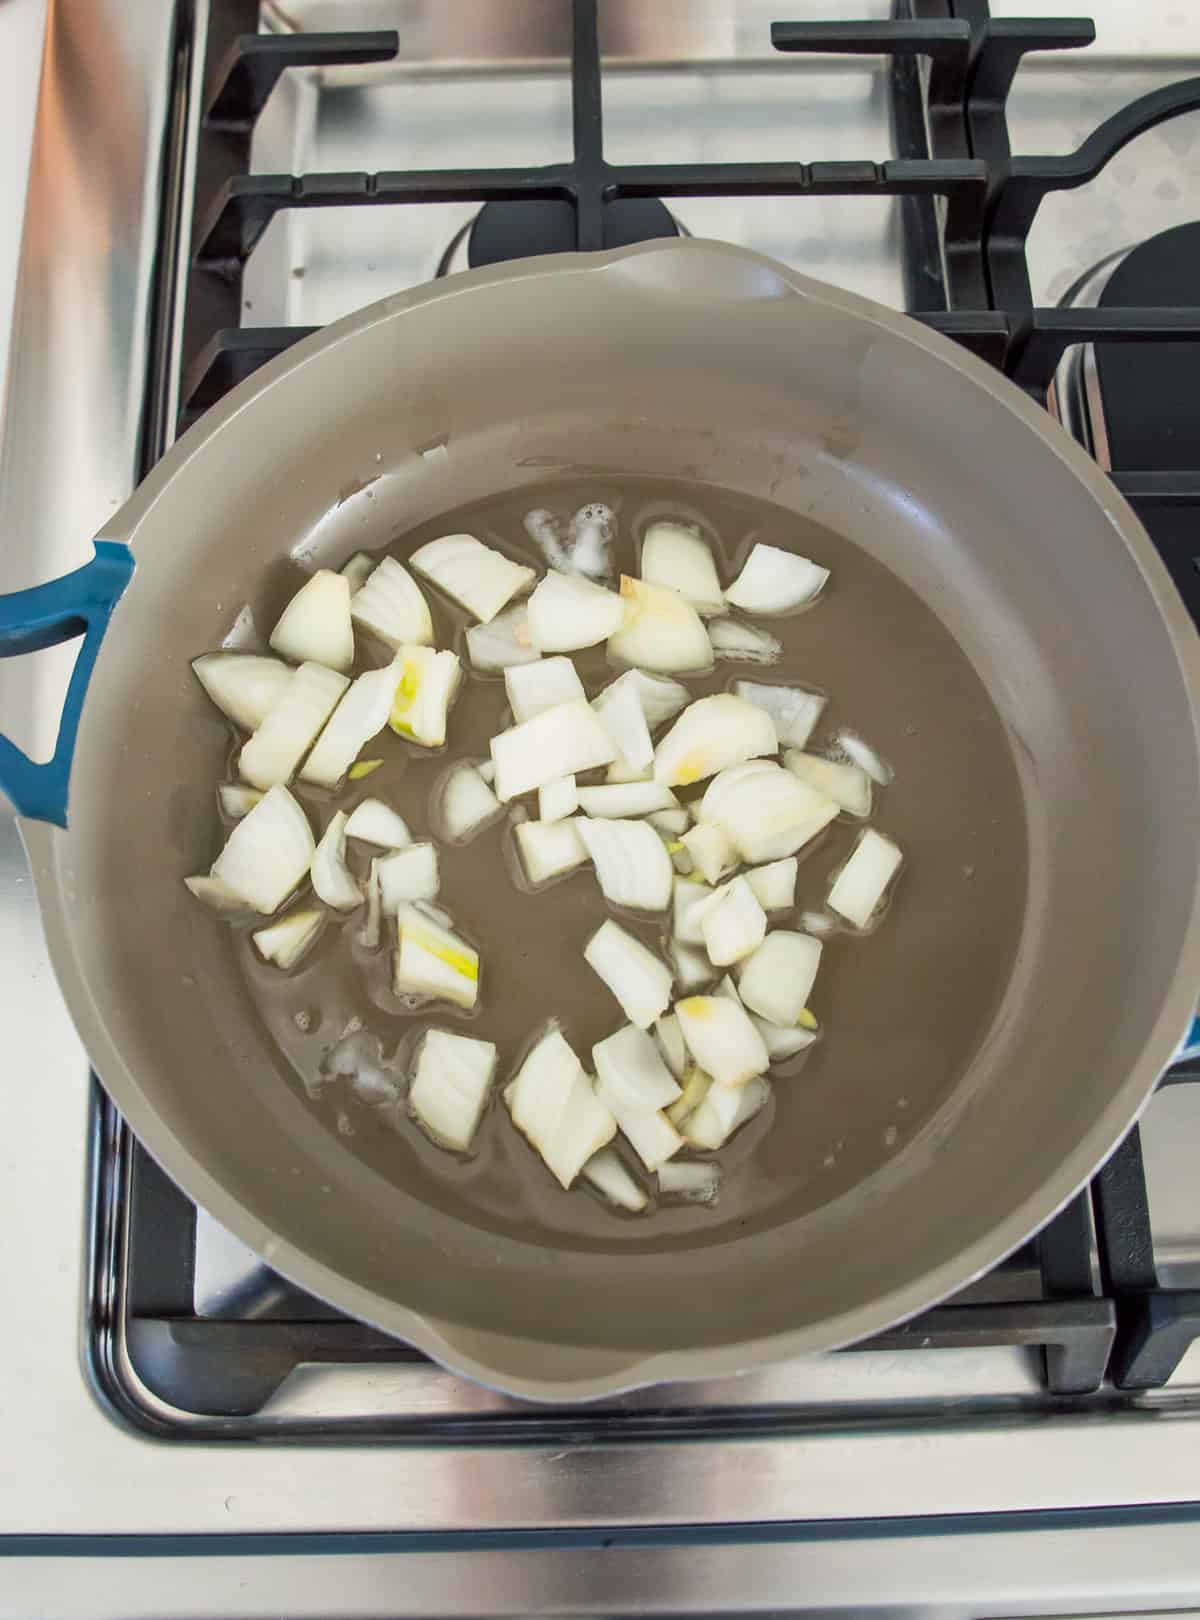 A grey pan on the stovetop with chopped onion cooking in it.